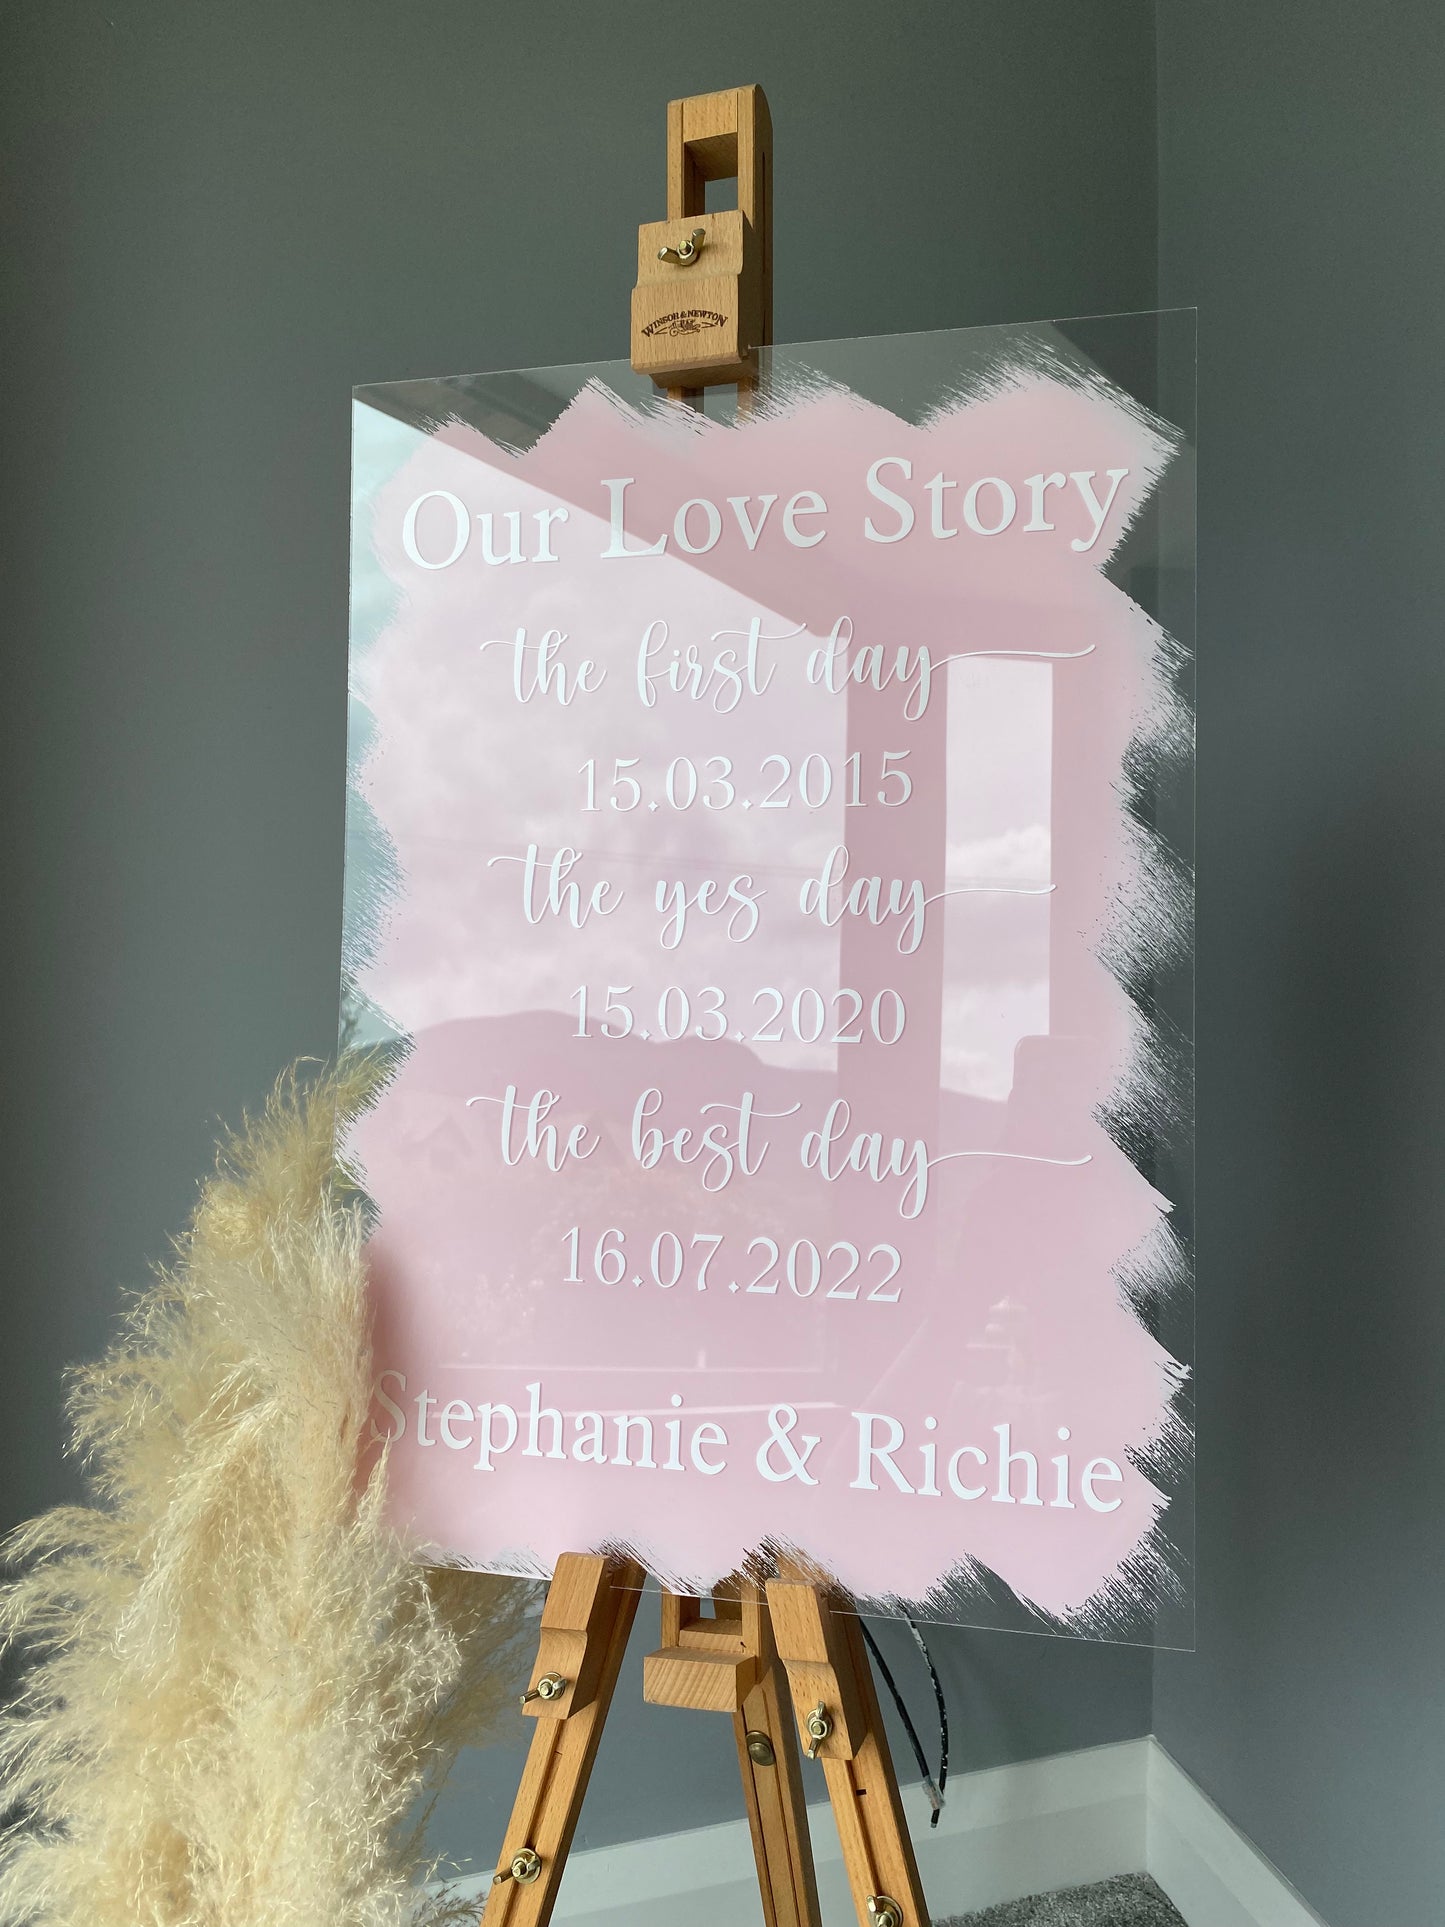 Our Love Story Signage